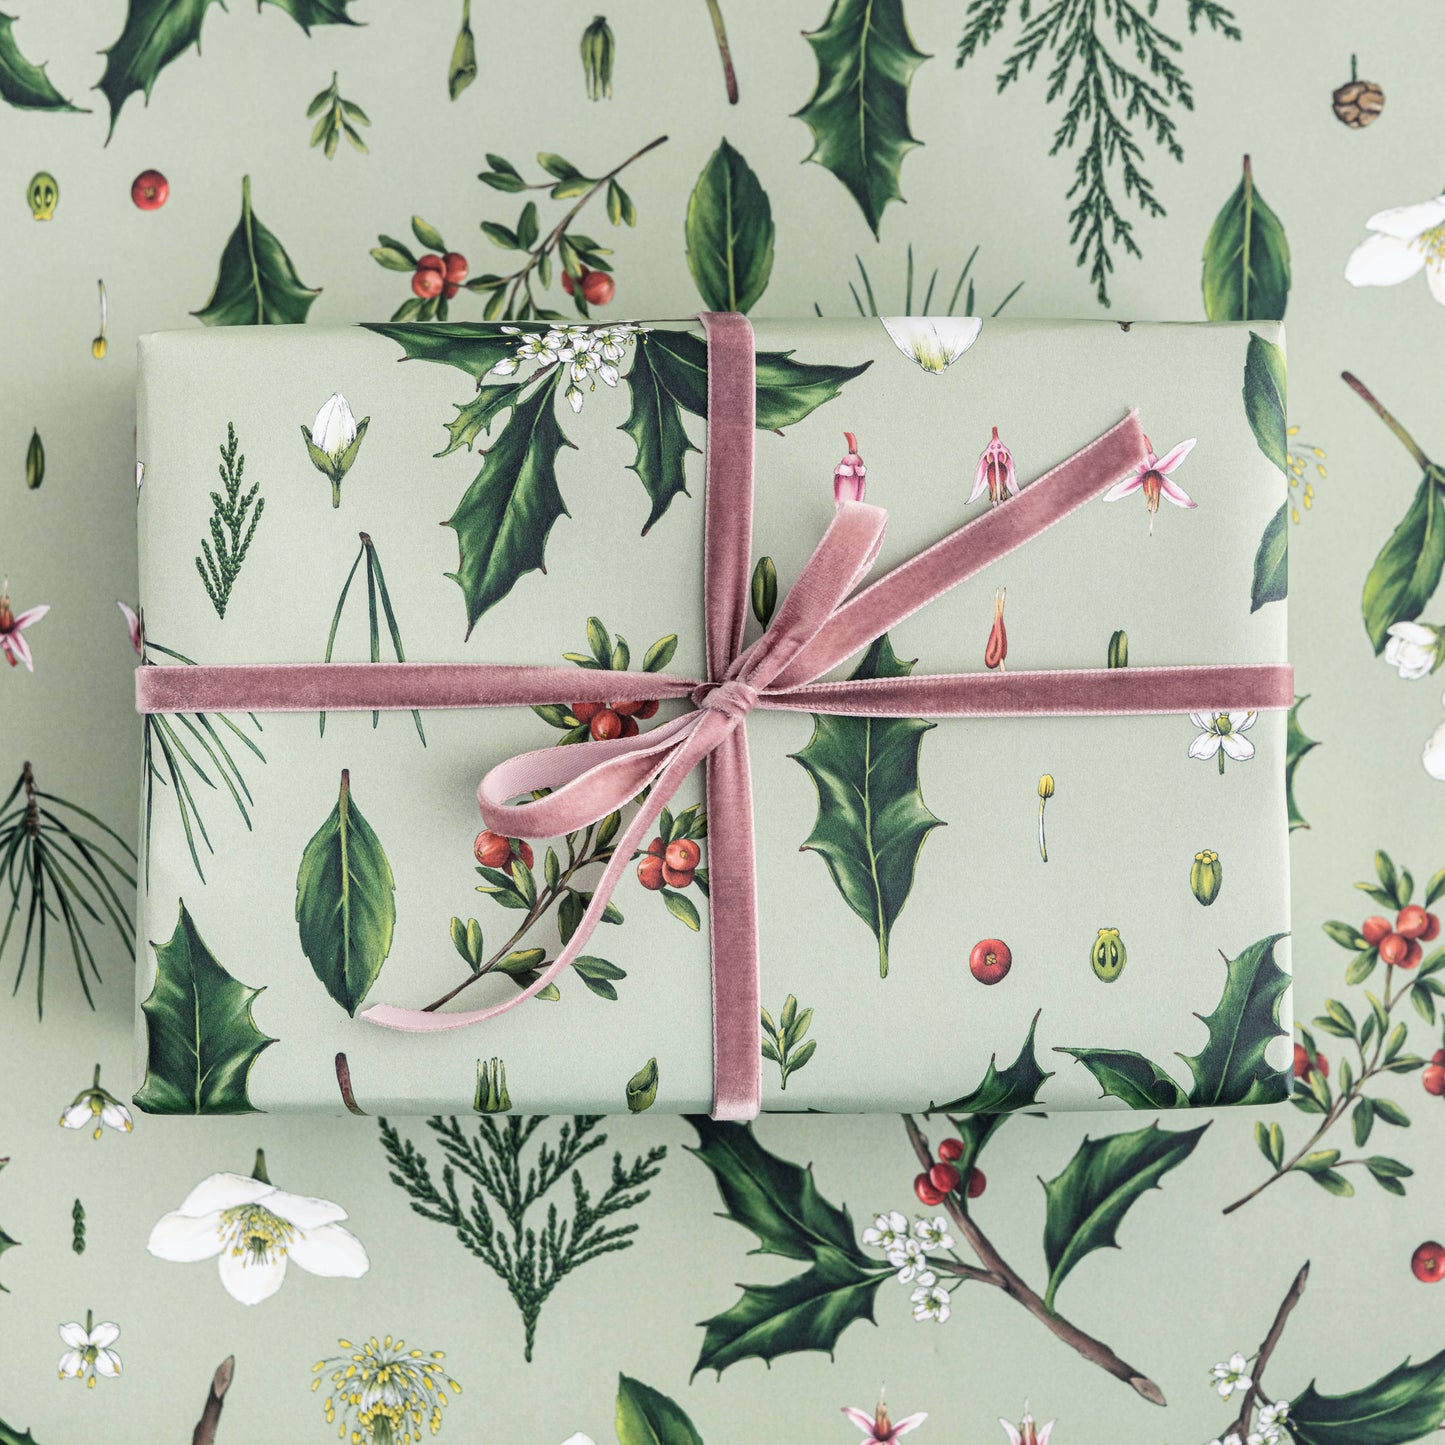 Berry Mix - Green - Christmas Gift Wrap Set of 5 sheets